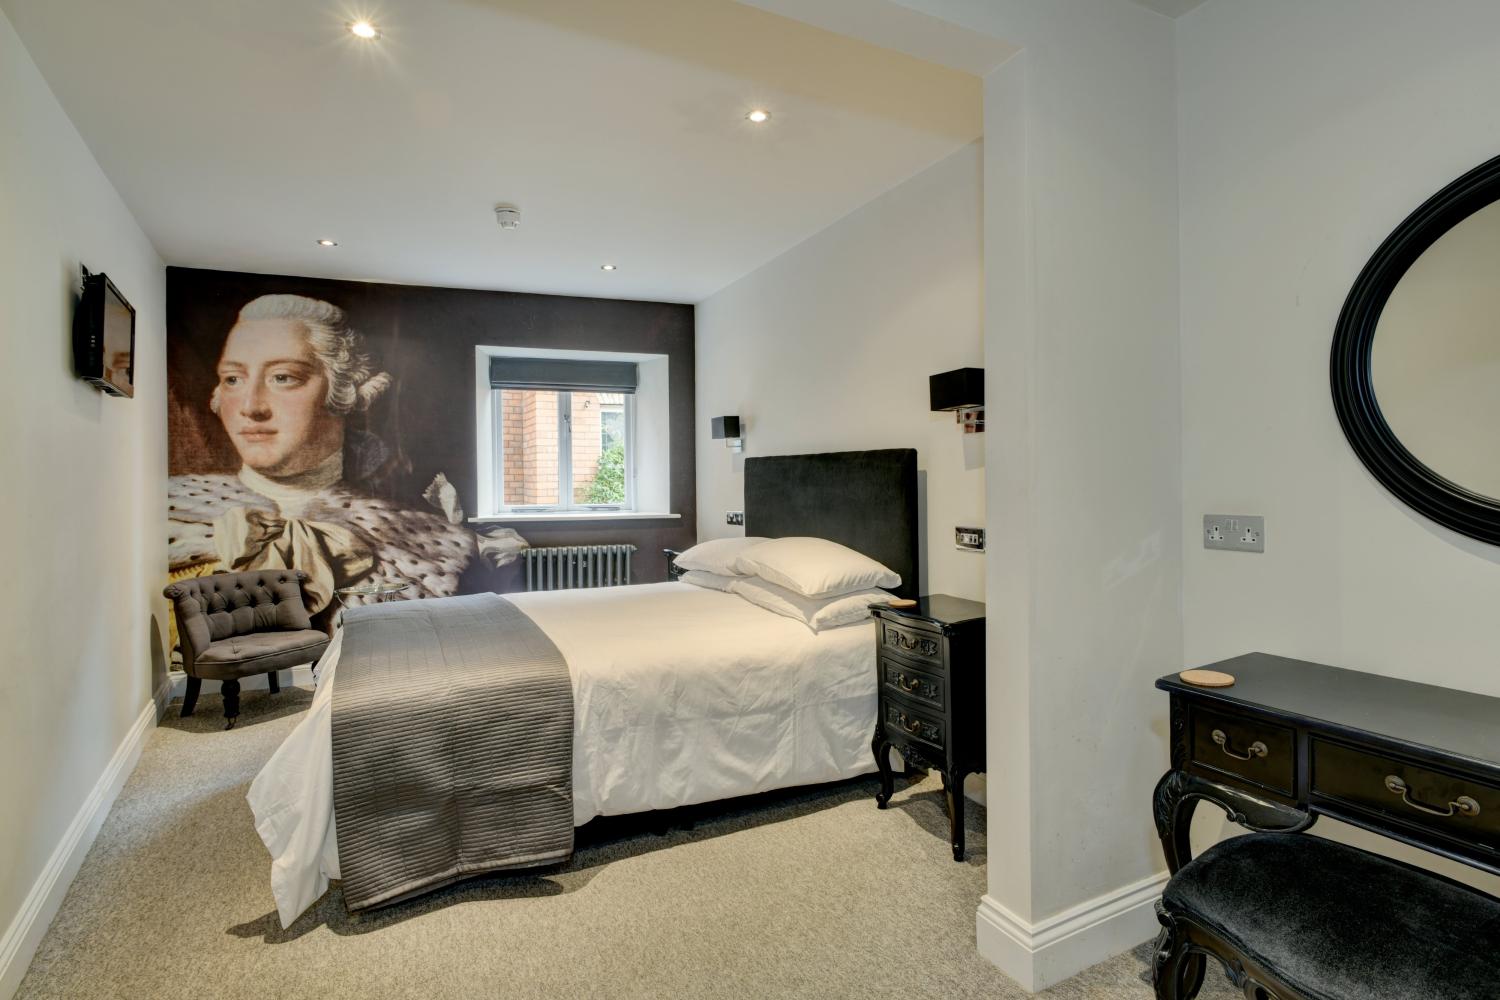 The Kings room. A king sized bed. En-suite bath & shower.